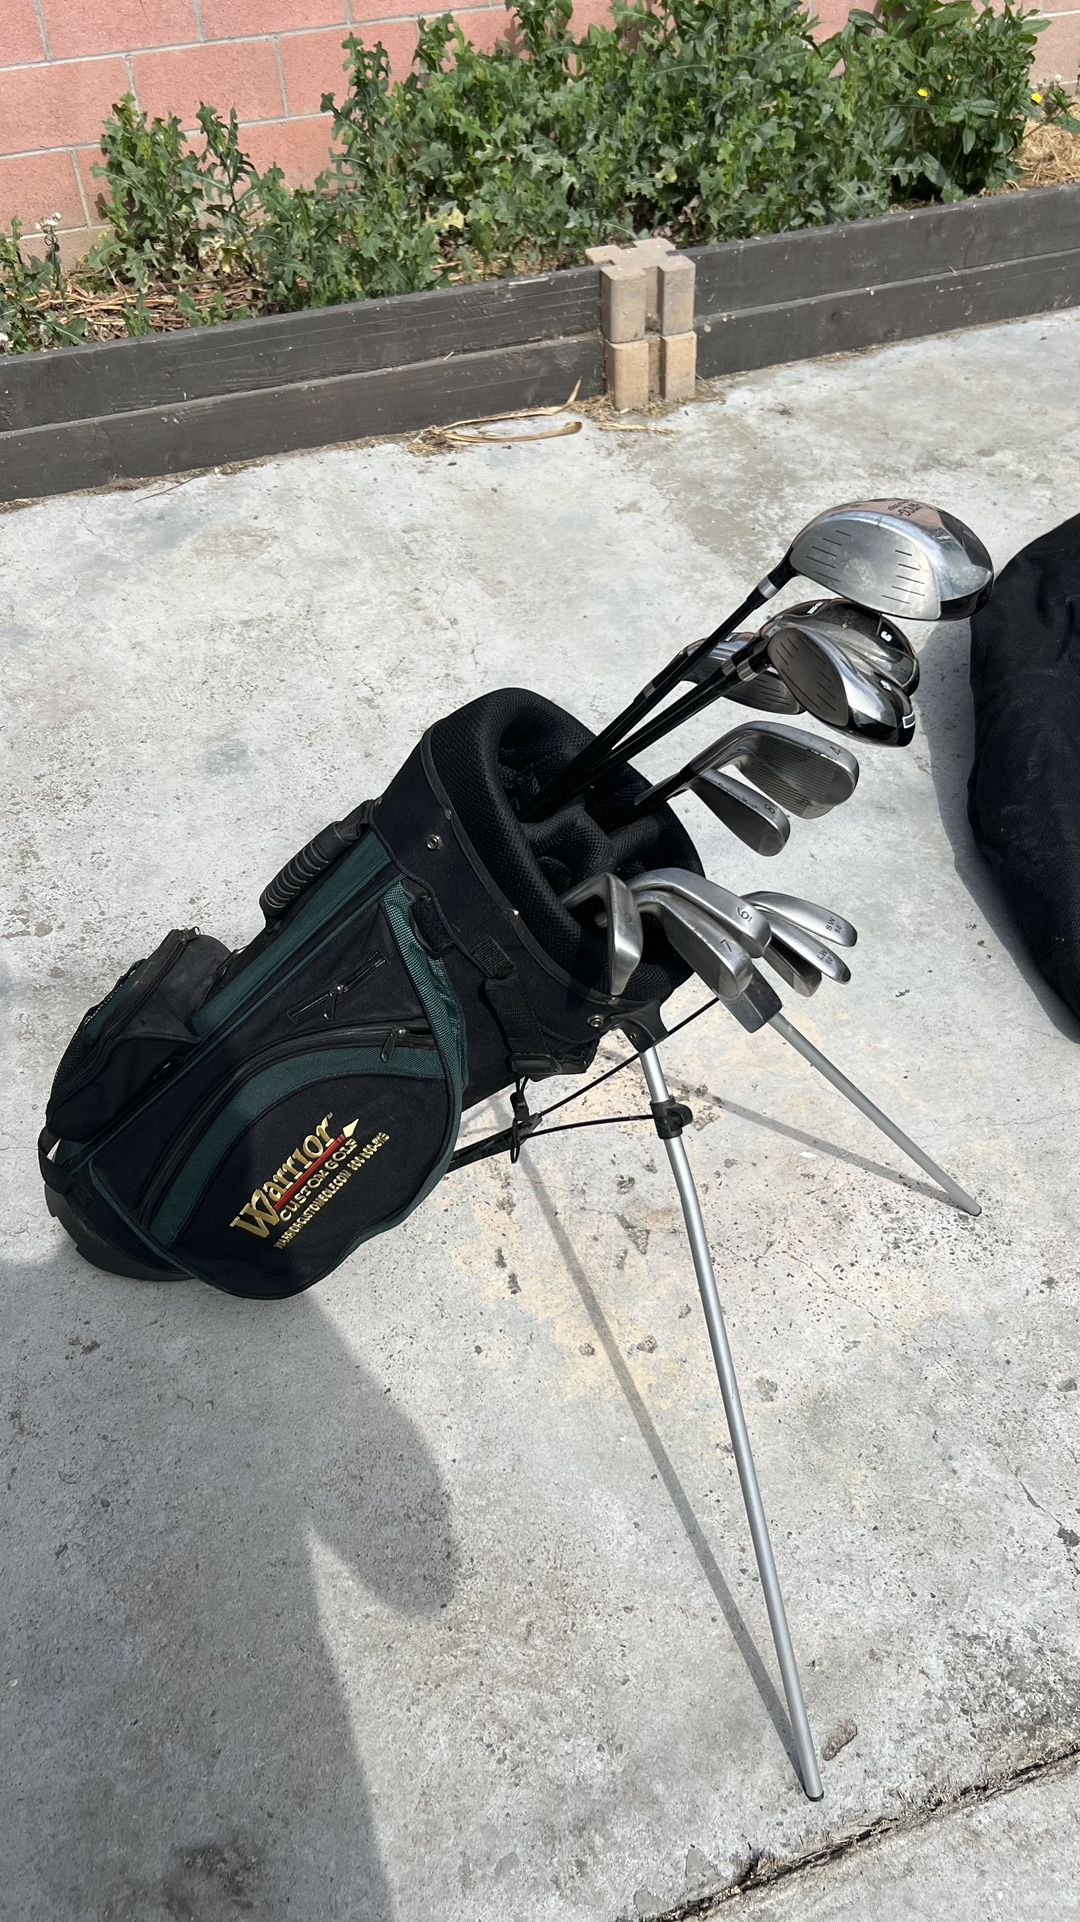 Golf Clubs And Bag 